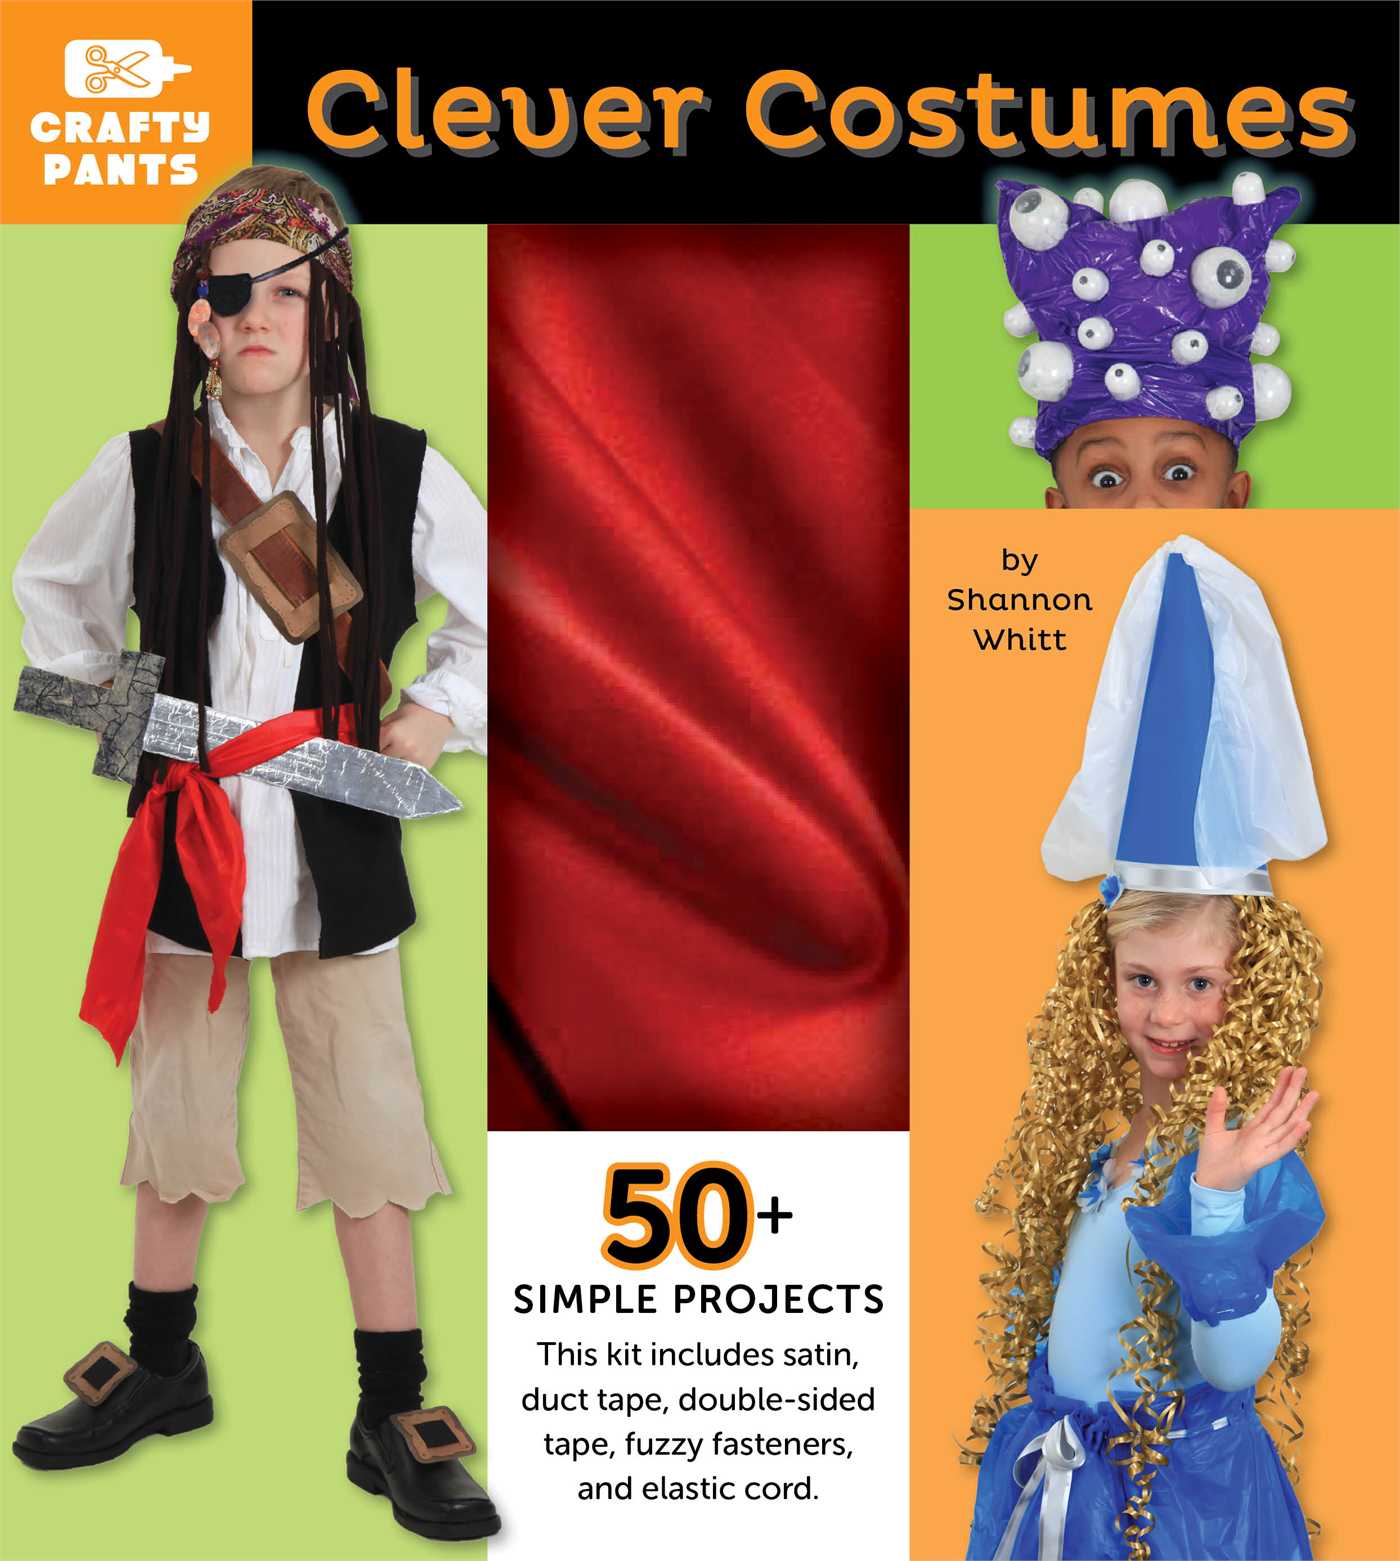 Clever Costumes : Crafty Pants